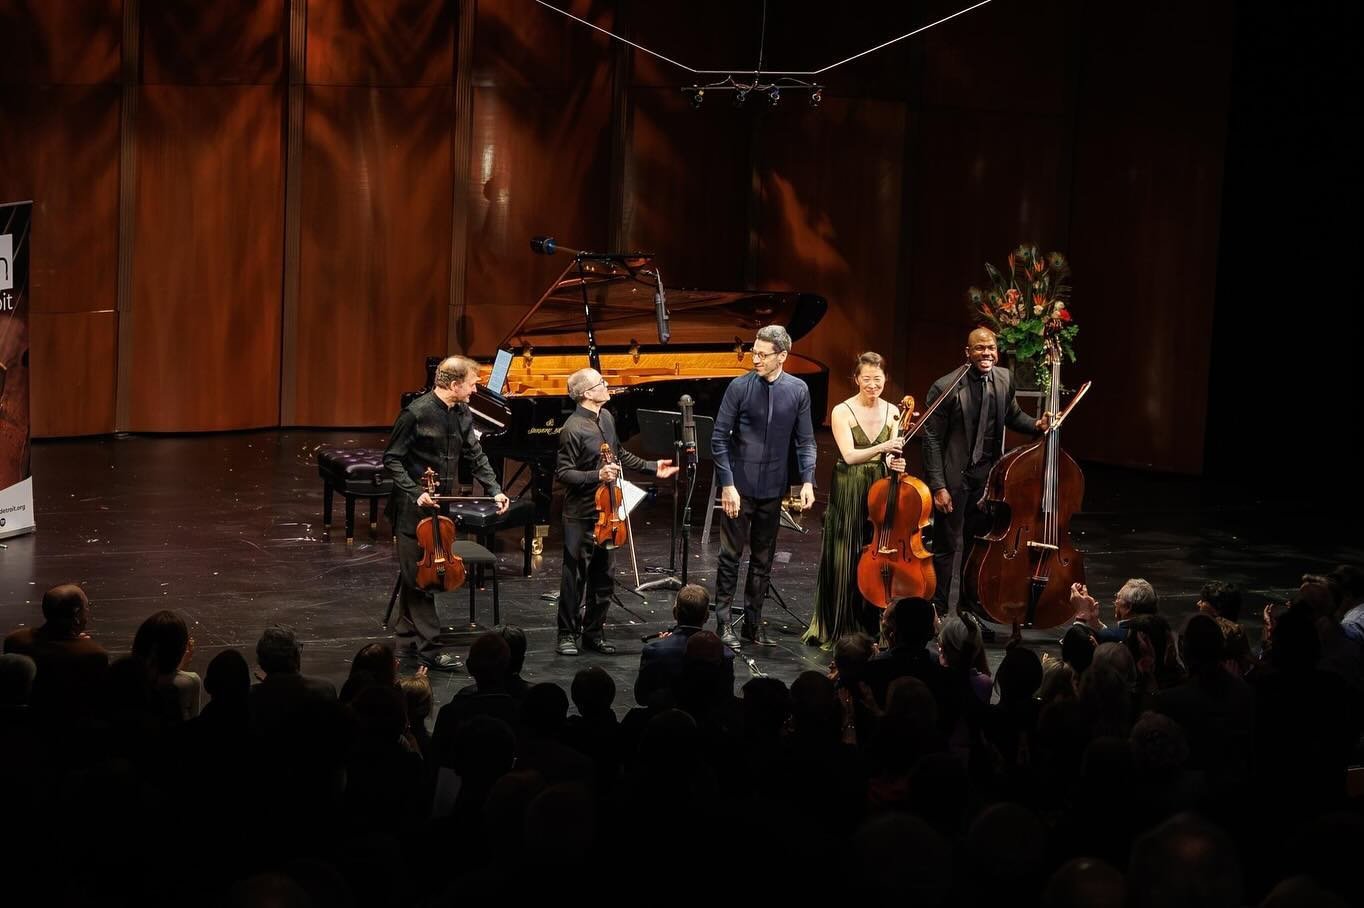 An unforgettable finale to the 80th season!✨ The visionaries Brentano Quartet, Jonathan Biss, and Joseph Conyers made last weekend&rsquo;s concert a true masterpiece. Here&rsquo;s to the magic of chamber music and the incredible artists who bring it 